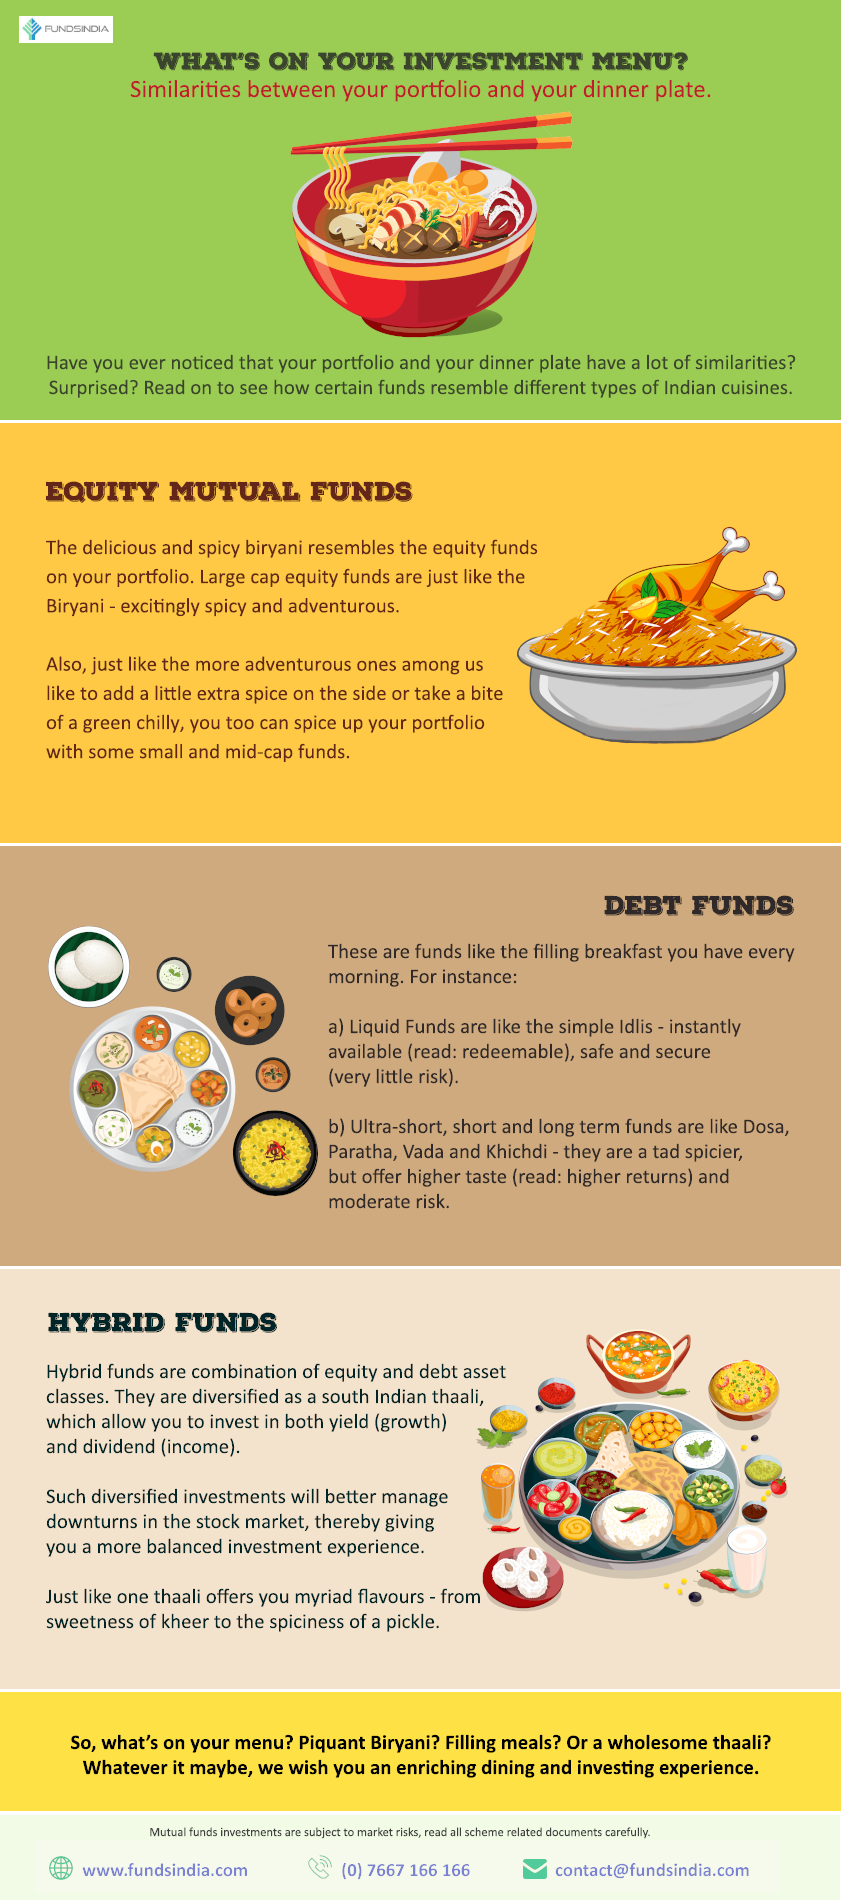 Similarities between your portfolio and your dinner plate